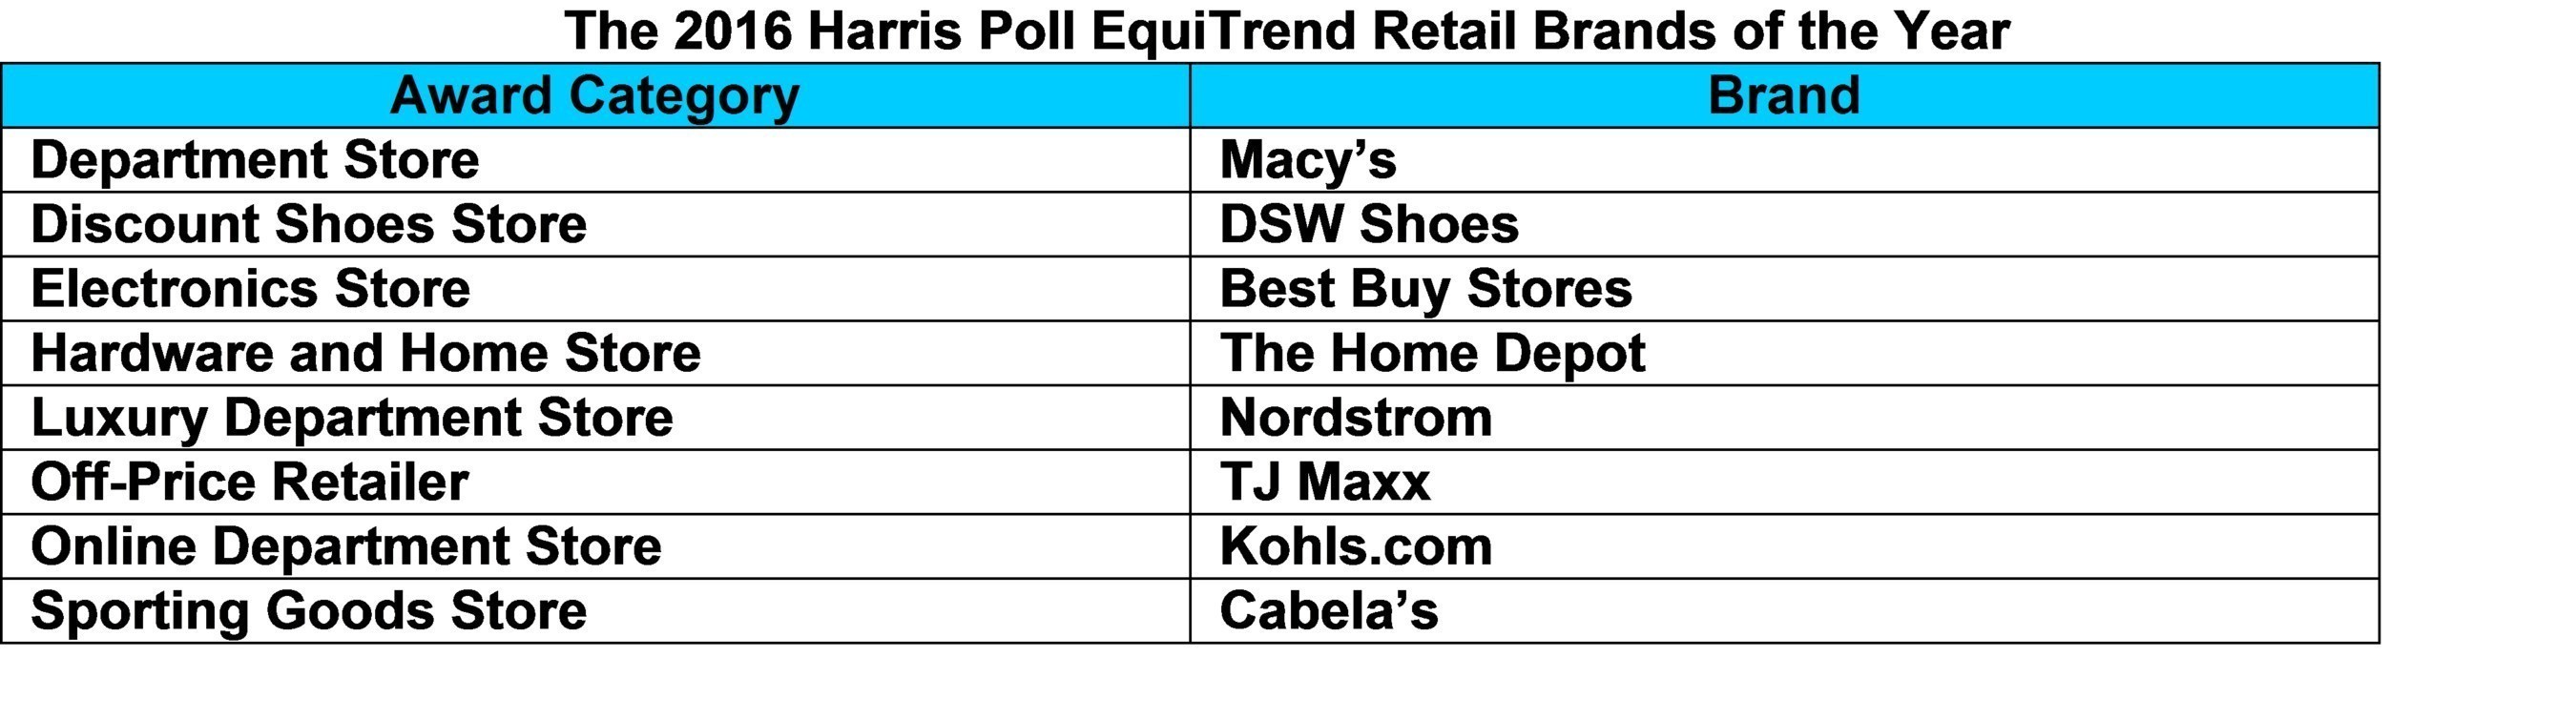 Retail brands of the year